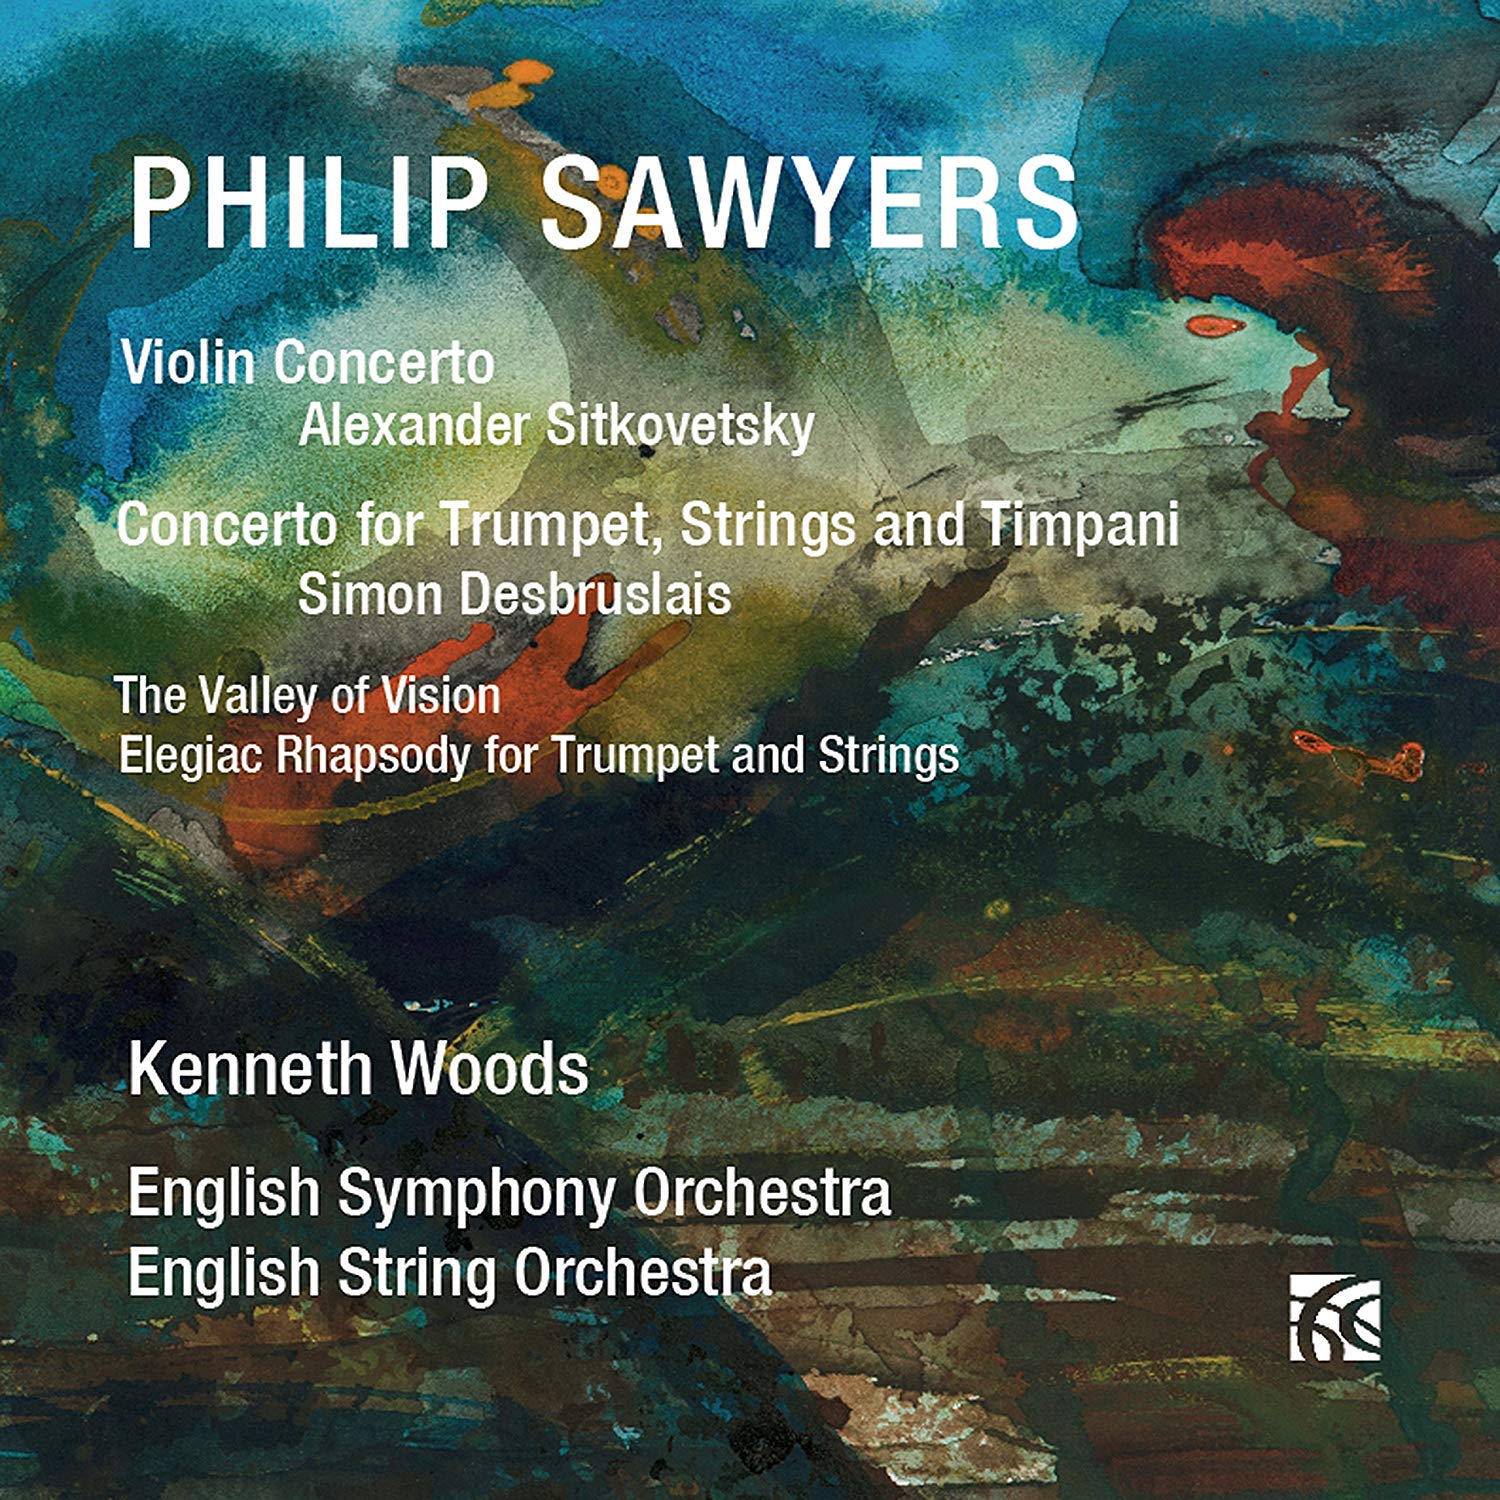 CD REVIEW – Musical Opinion on Sawyers’ Concerti for Violin and Trumpet, The Valley of Vision (NIMBUS) FIVE STARS